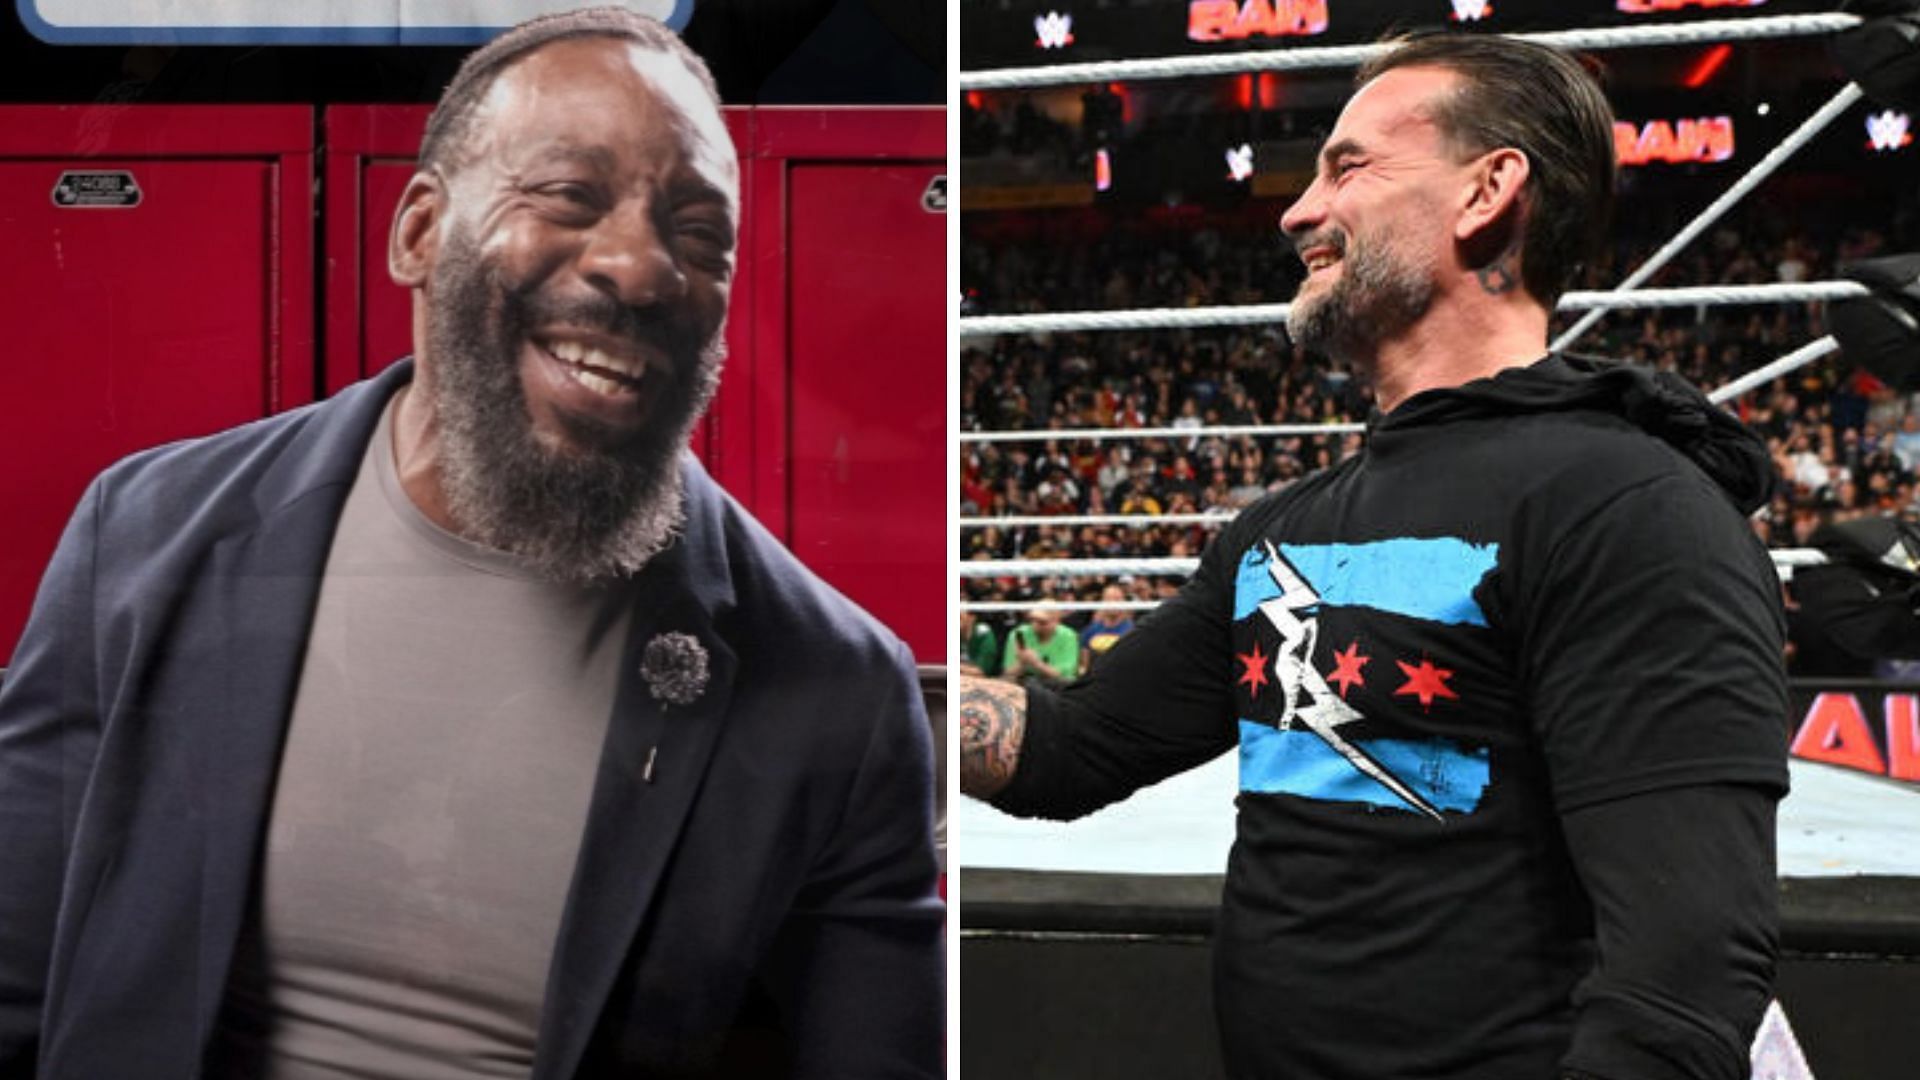 Booker T on the left and CM Punk on the right [Image credits: stars